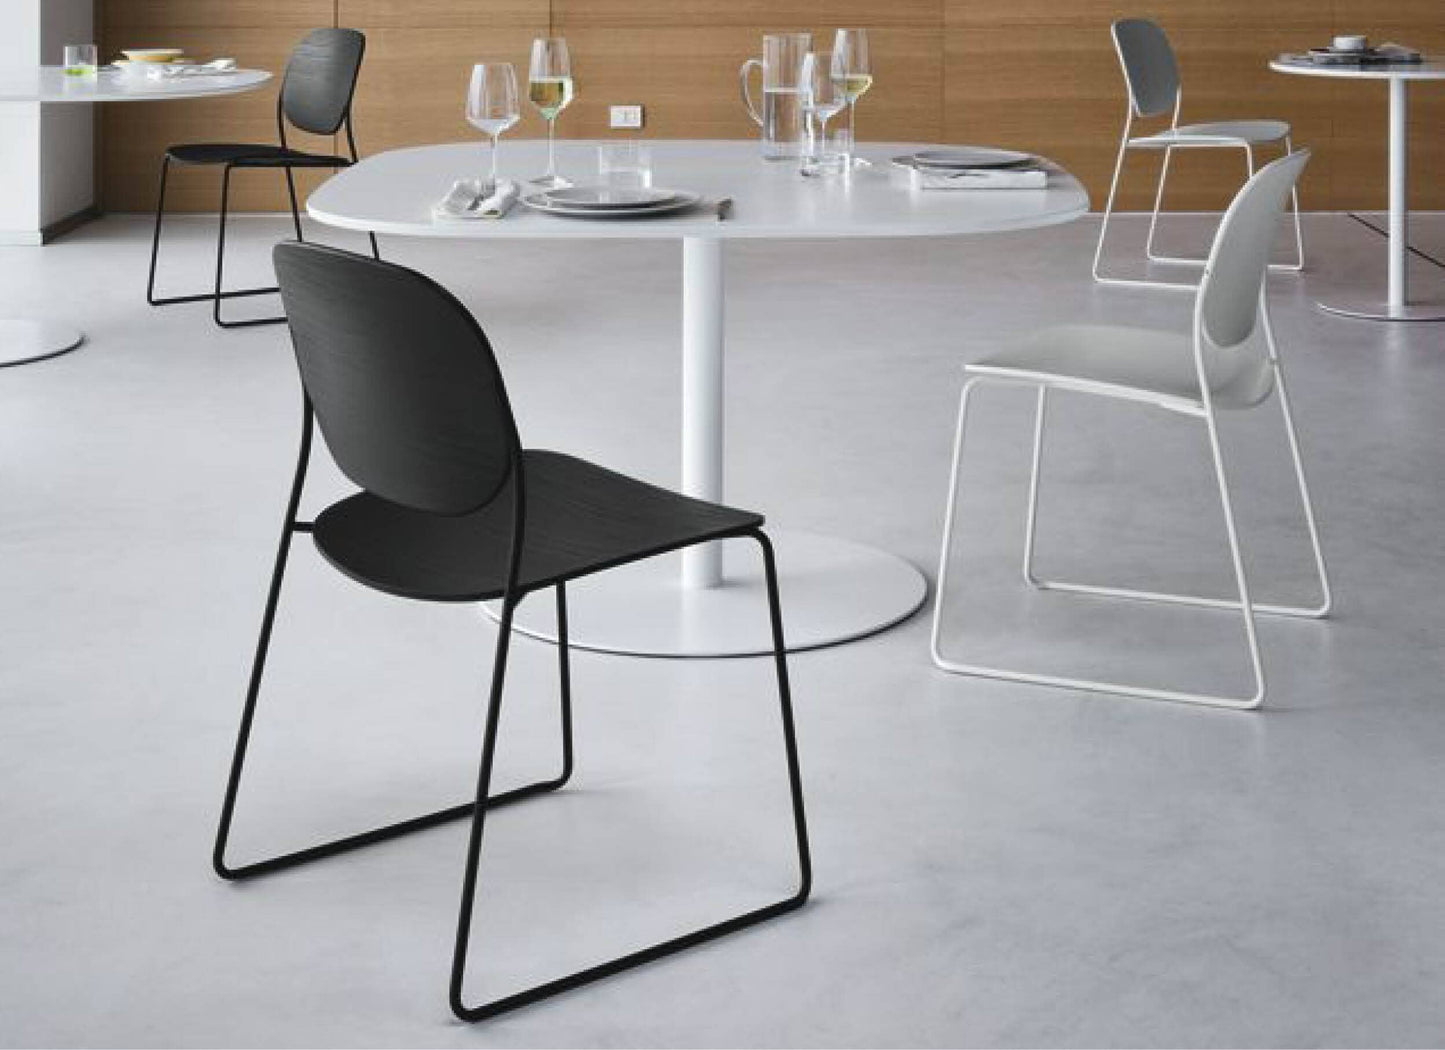 Olo Dining Chairs in Black (3) Indoor Furniture Lapalma 